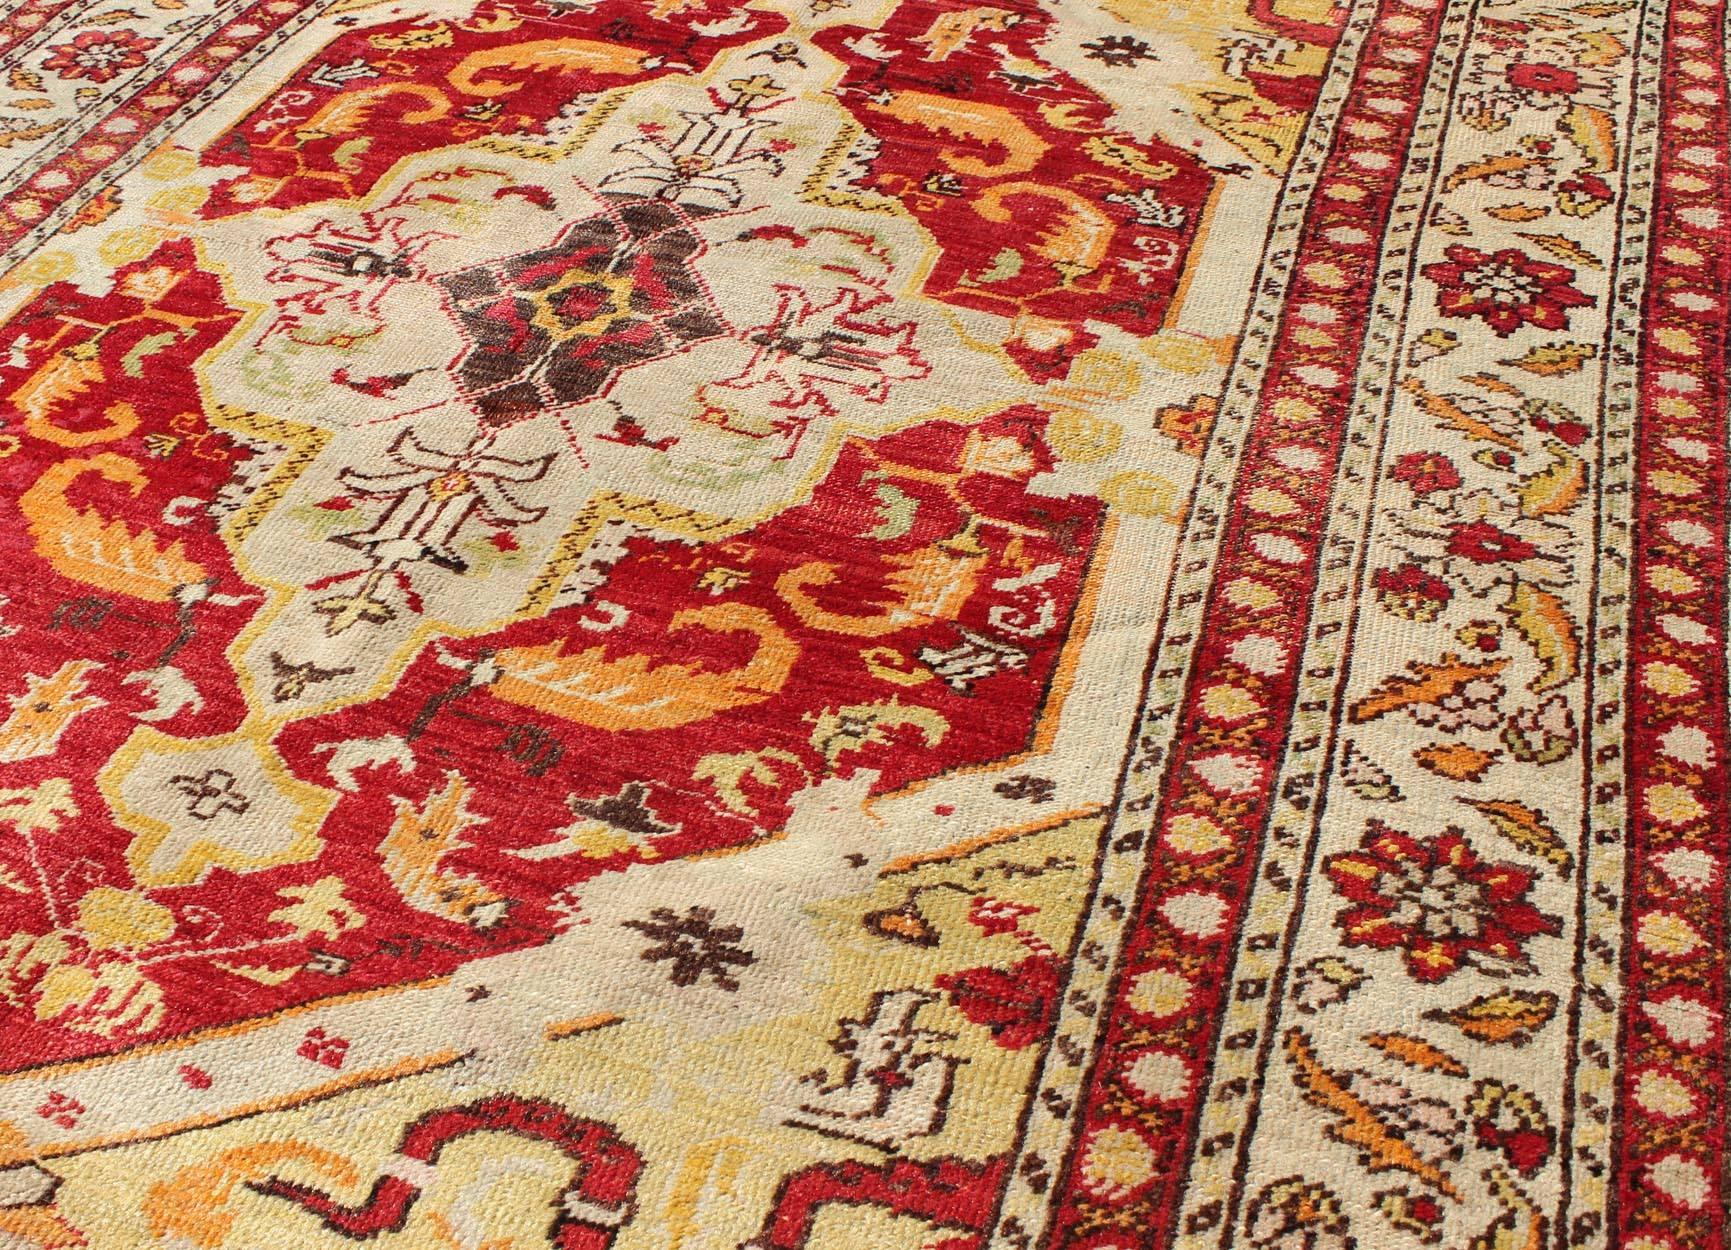 Antique Turkish Fine Sivas rug with center  medallion in Red, yellow & Green In Excellent Condition For Sale In Atlanta, GA